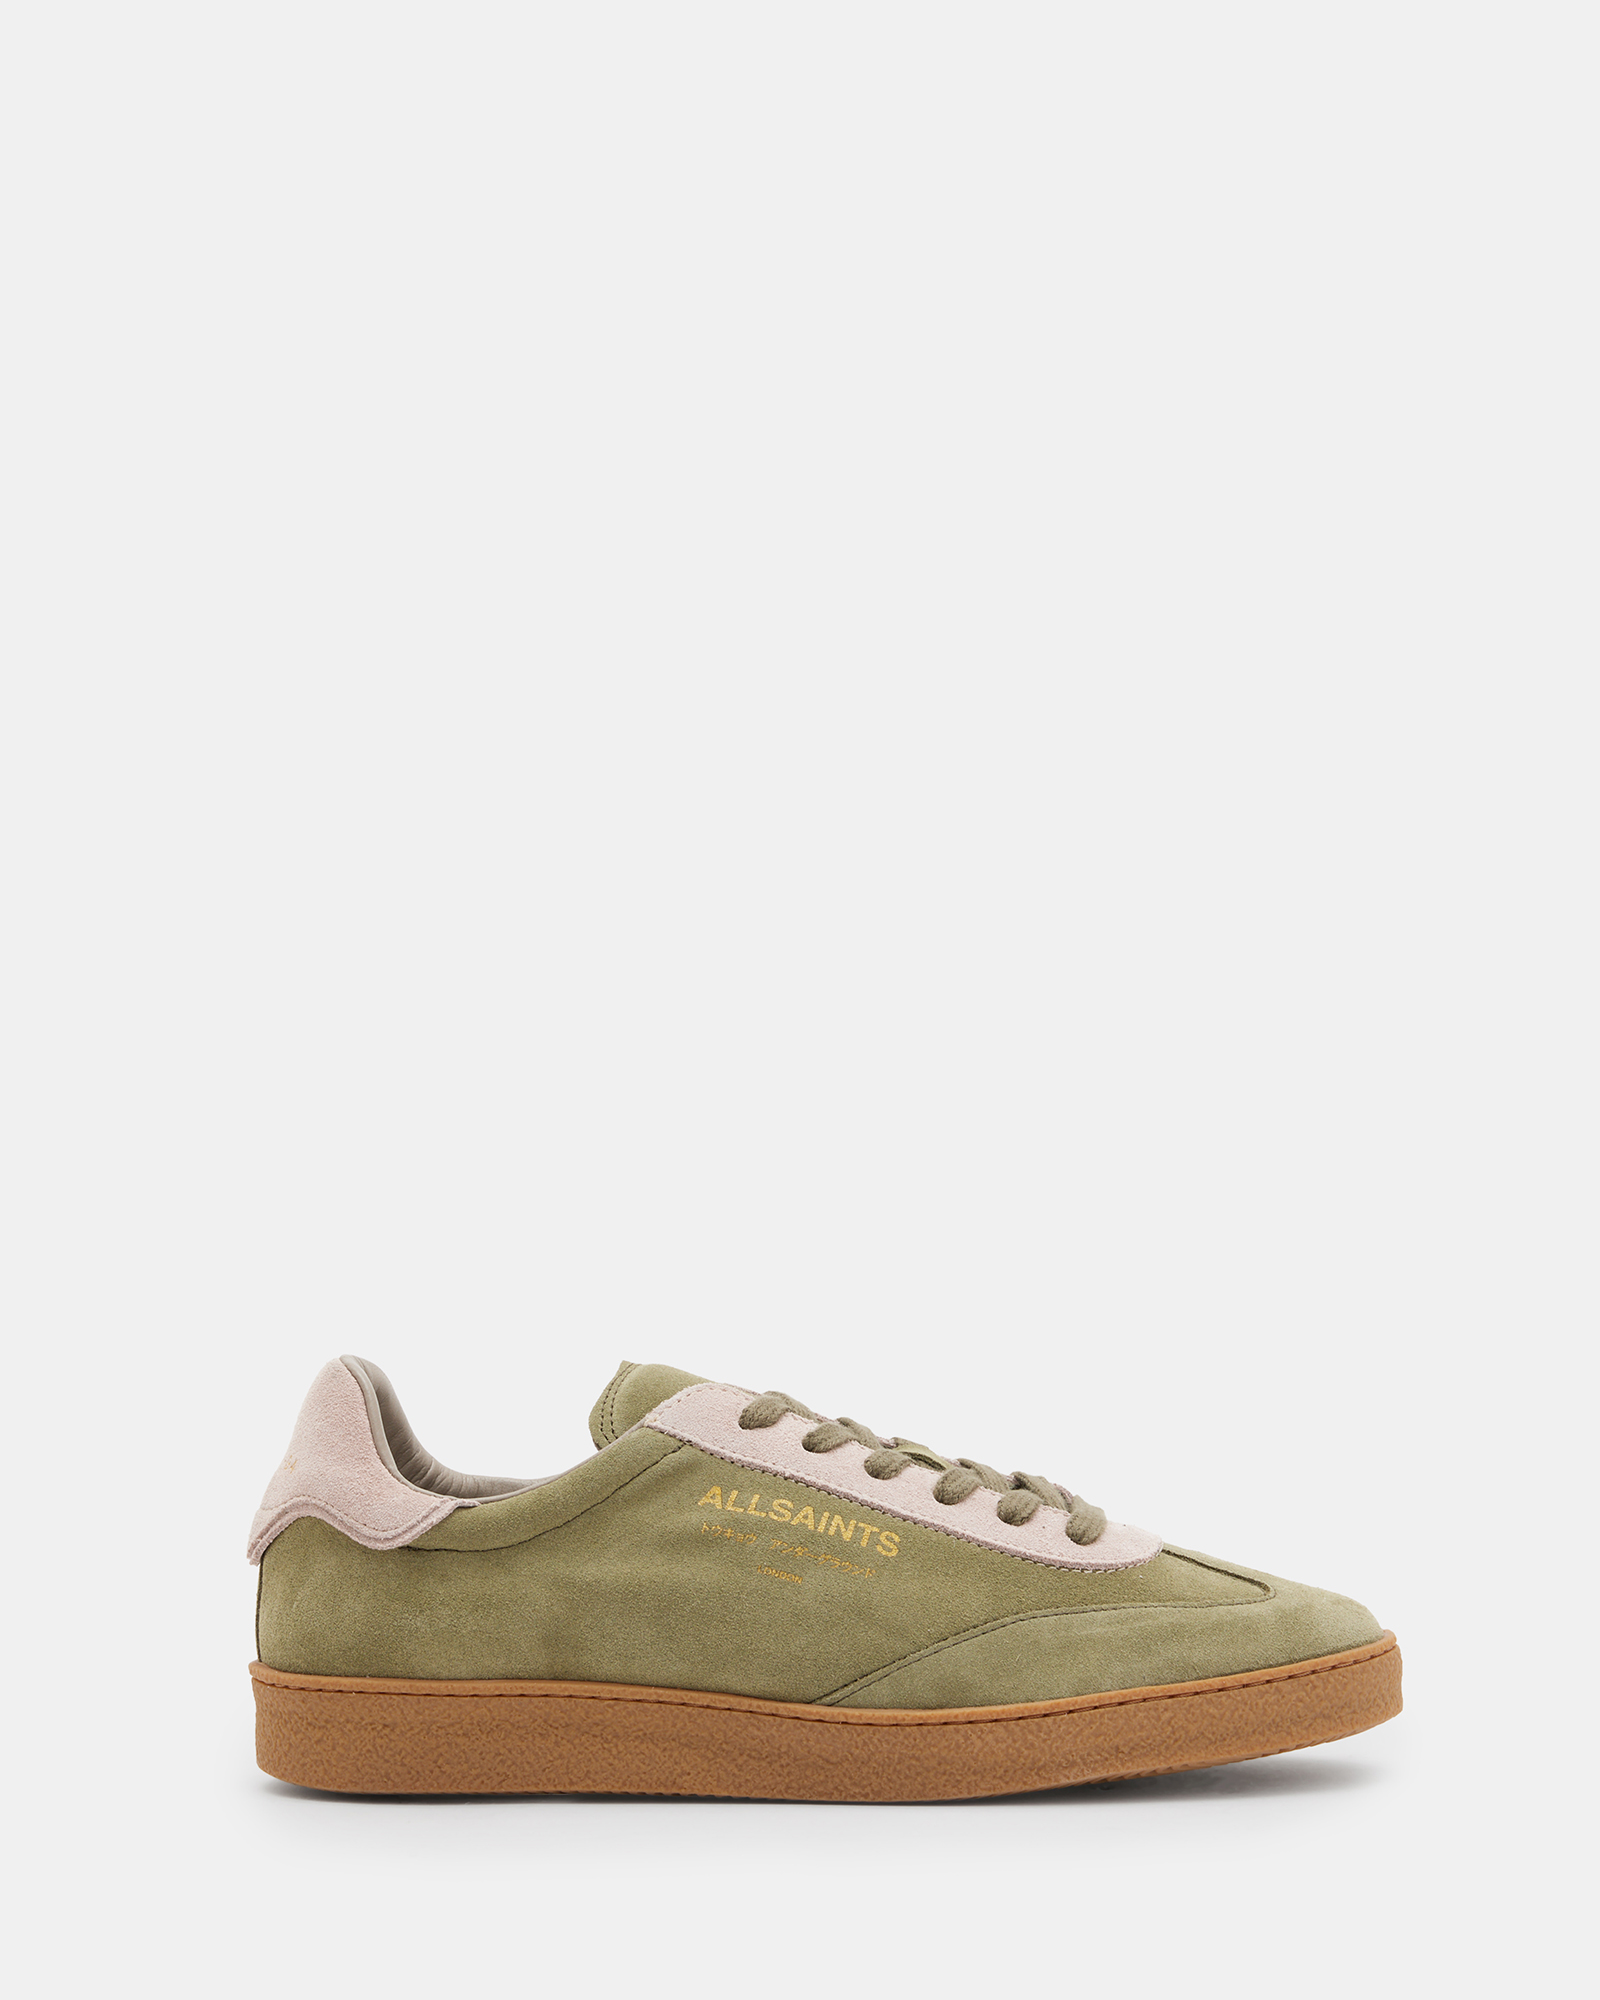 AllSaints Thelma Suede Low Top Trainers,, KHAKI/ROSE PINK